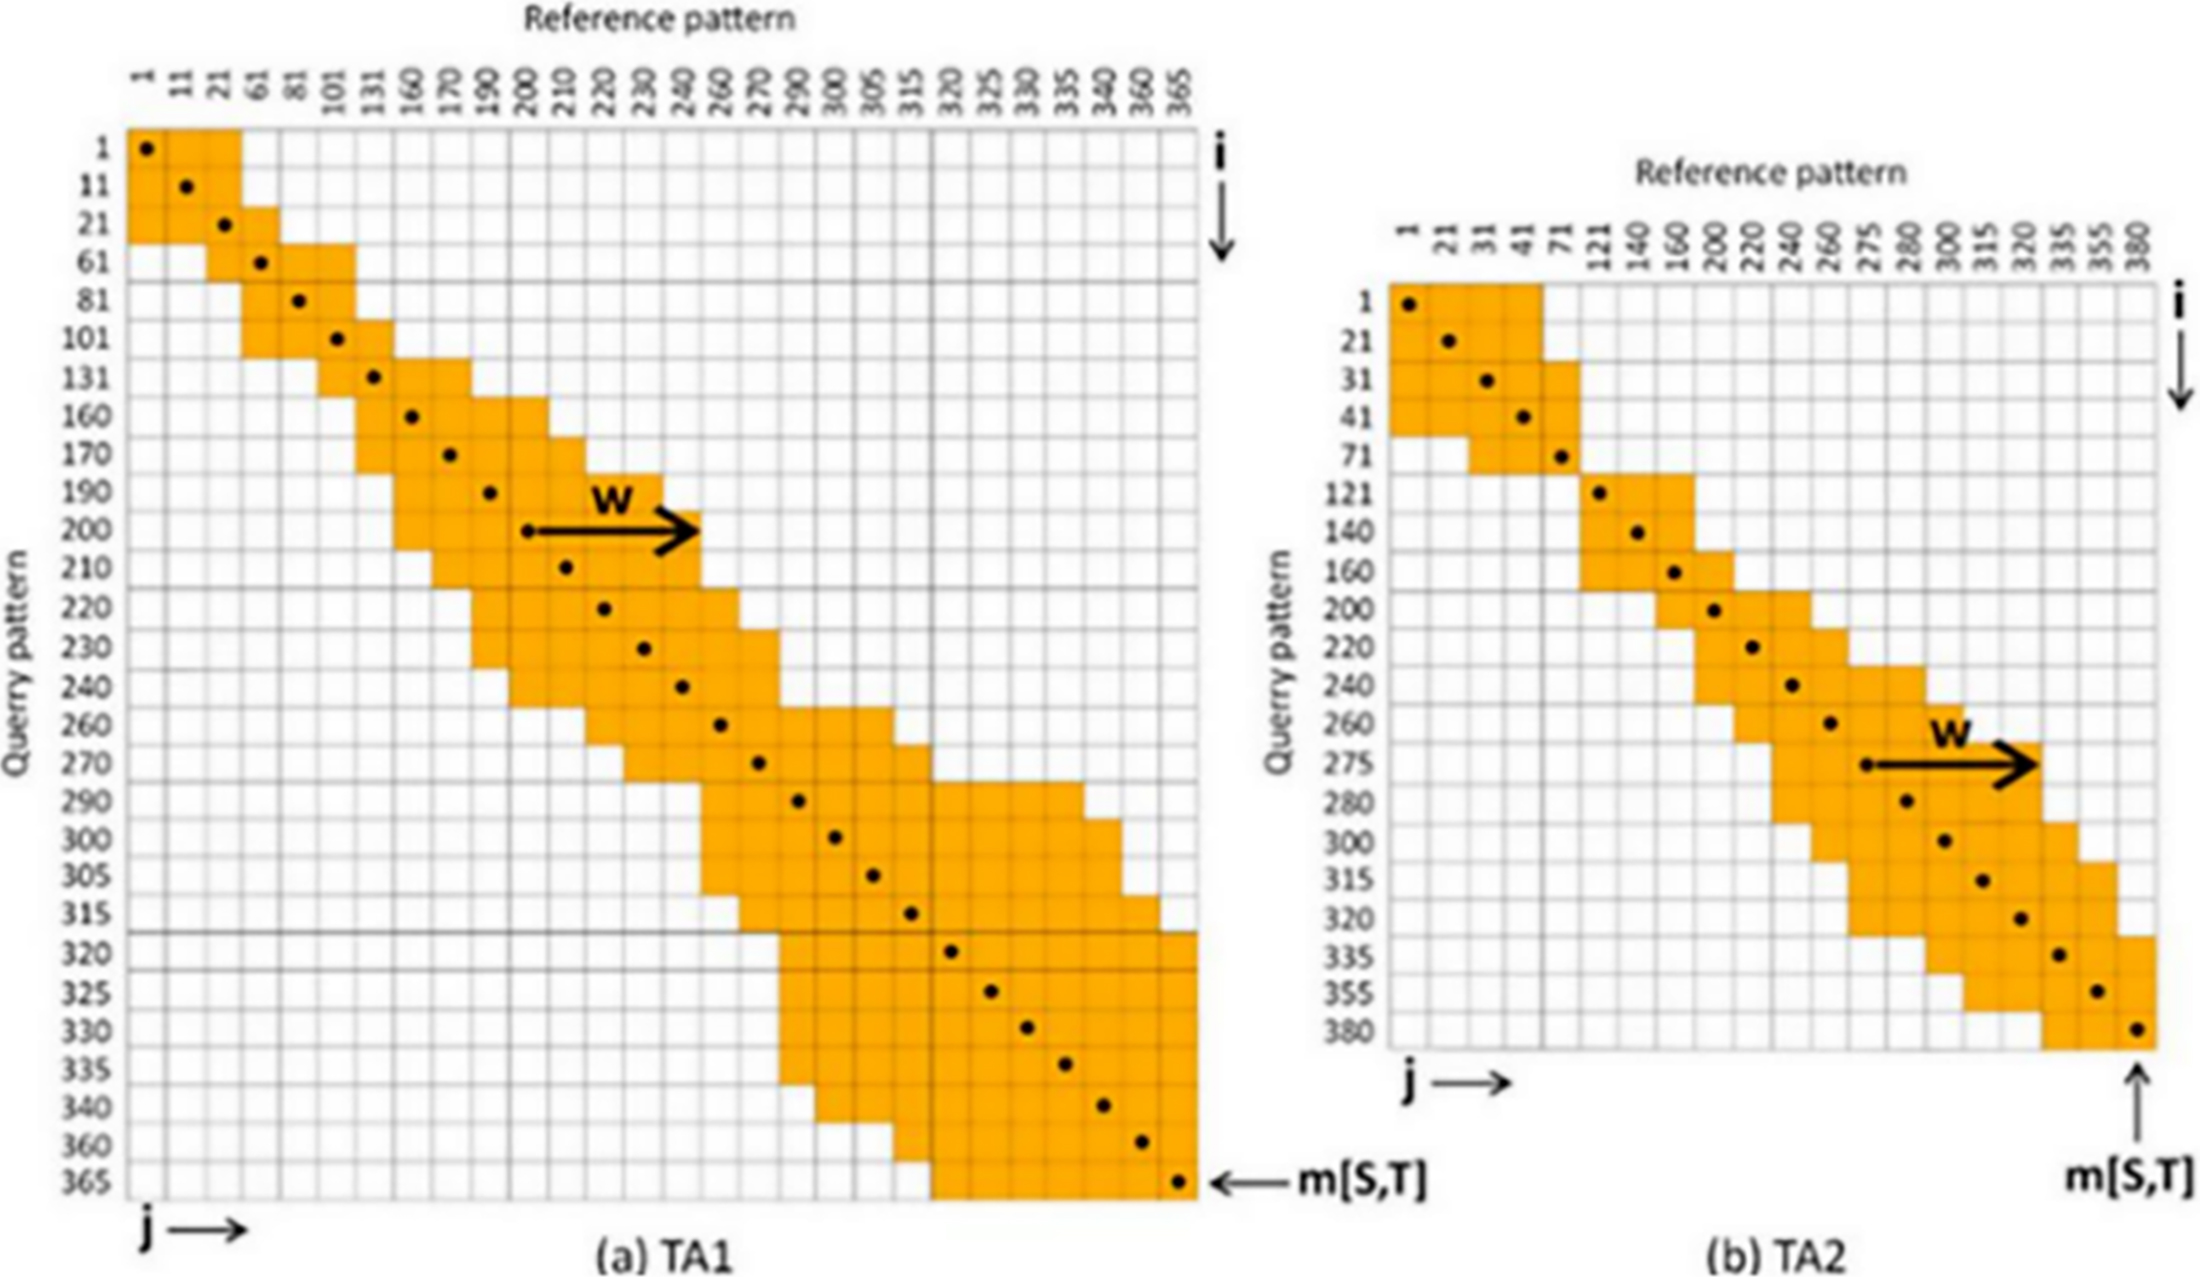 Computing the alignment between two sequences at hypothetical test areas (TA) TA1 andTA2. The vertical and horizontal values of the DTW matrix represent the date of an image. The alignment between two sequences is computed only for the yellow cells of the matrix, reducing the number of computations necessary (a maximum time delay, w, of 45 days is used in this example). After computing the matrix from upper left to lower right, the last element of the matrix, m[S,T], is returned, as a measure of DTW dissimilarity between the two compared sequences. Image credits: Csillik et al. [16].